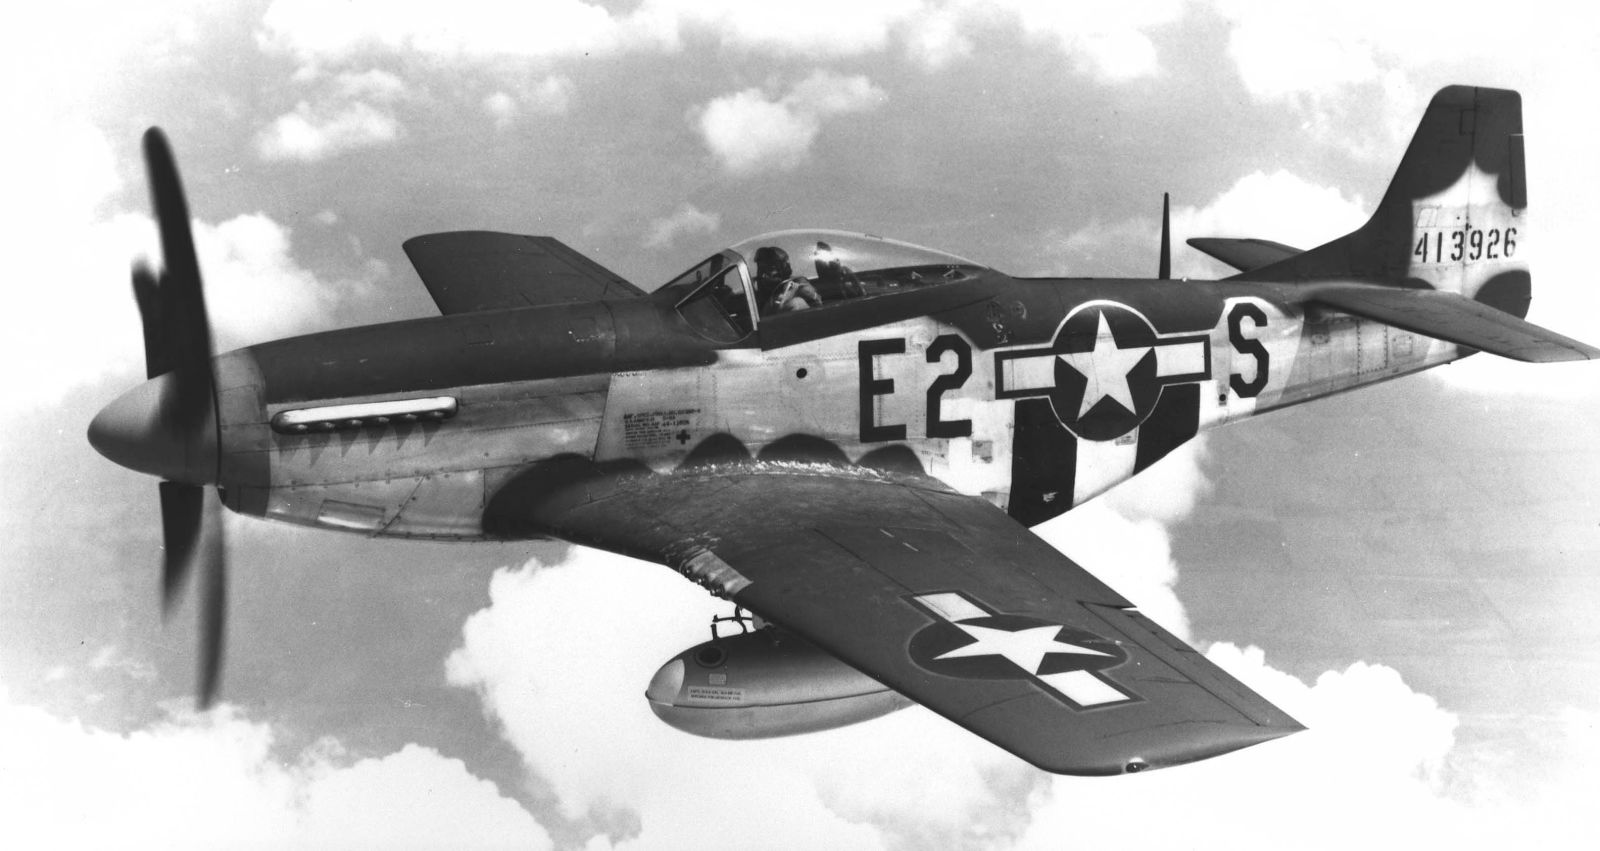 And the Americans mounted a version of the Merlin built by Packard in the North American P-51 Mustang, one of the greatest fighters of WWII (US Air Force)